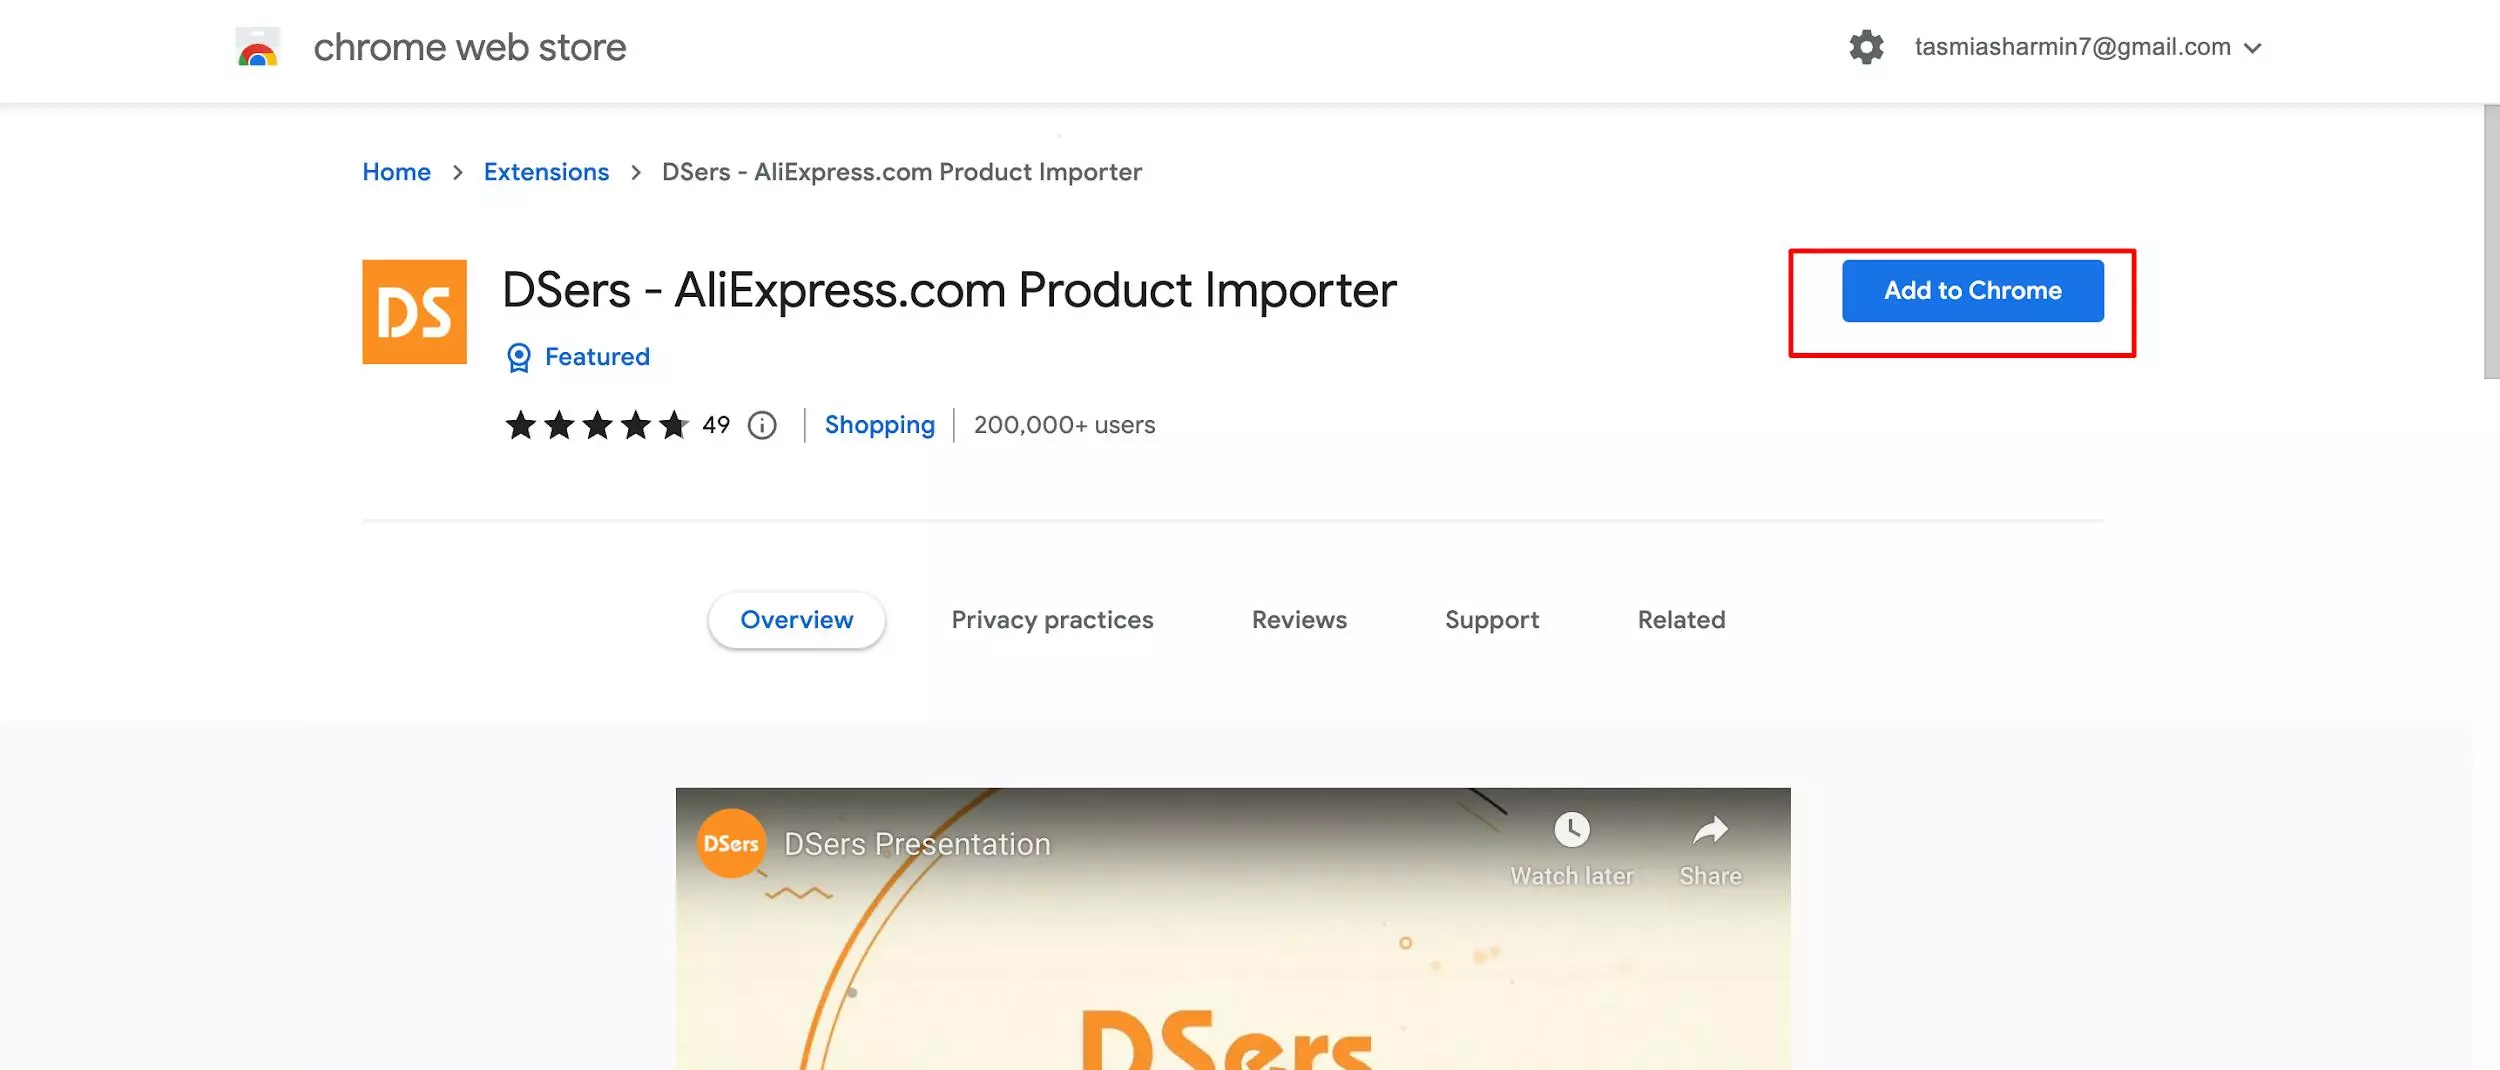 How to use DSers chrome extension?